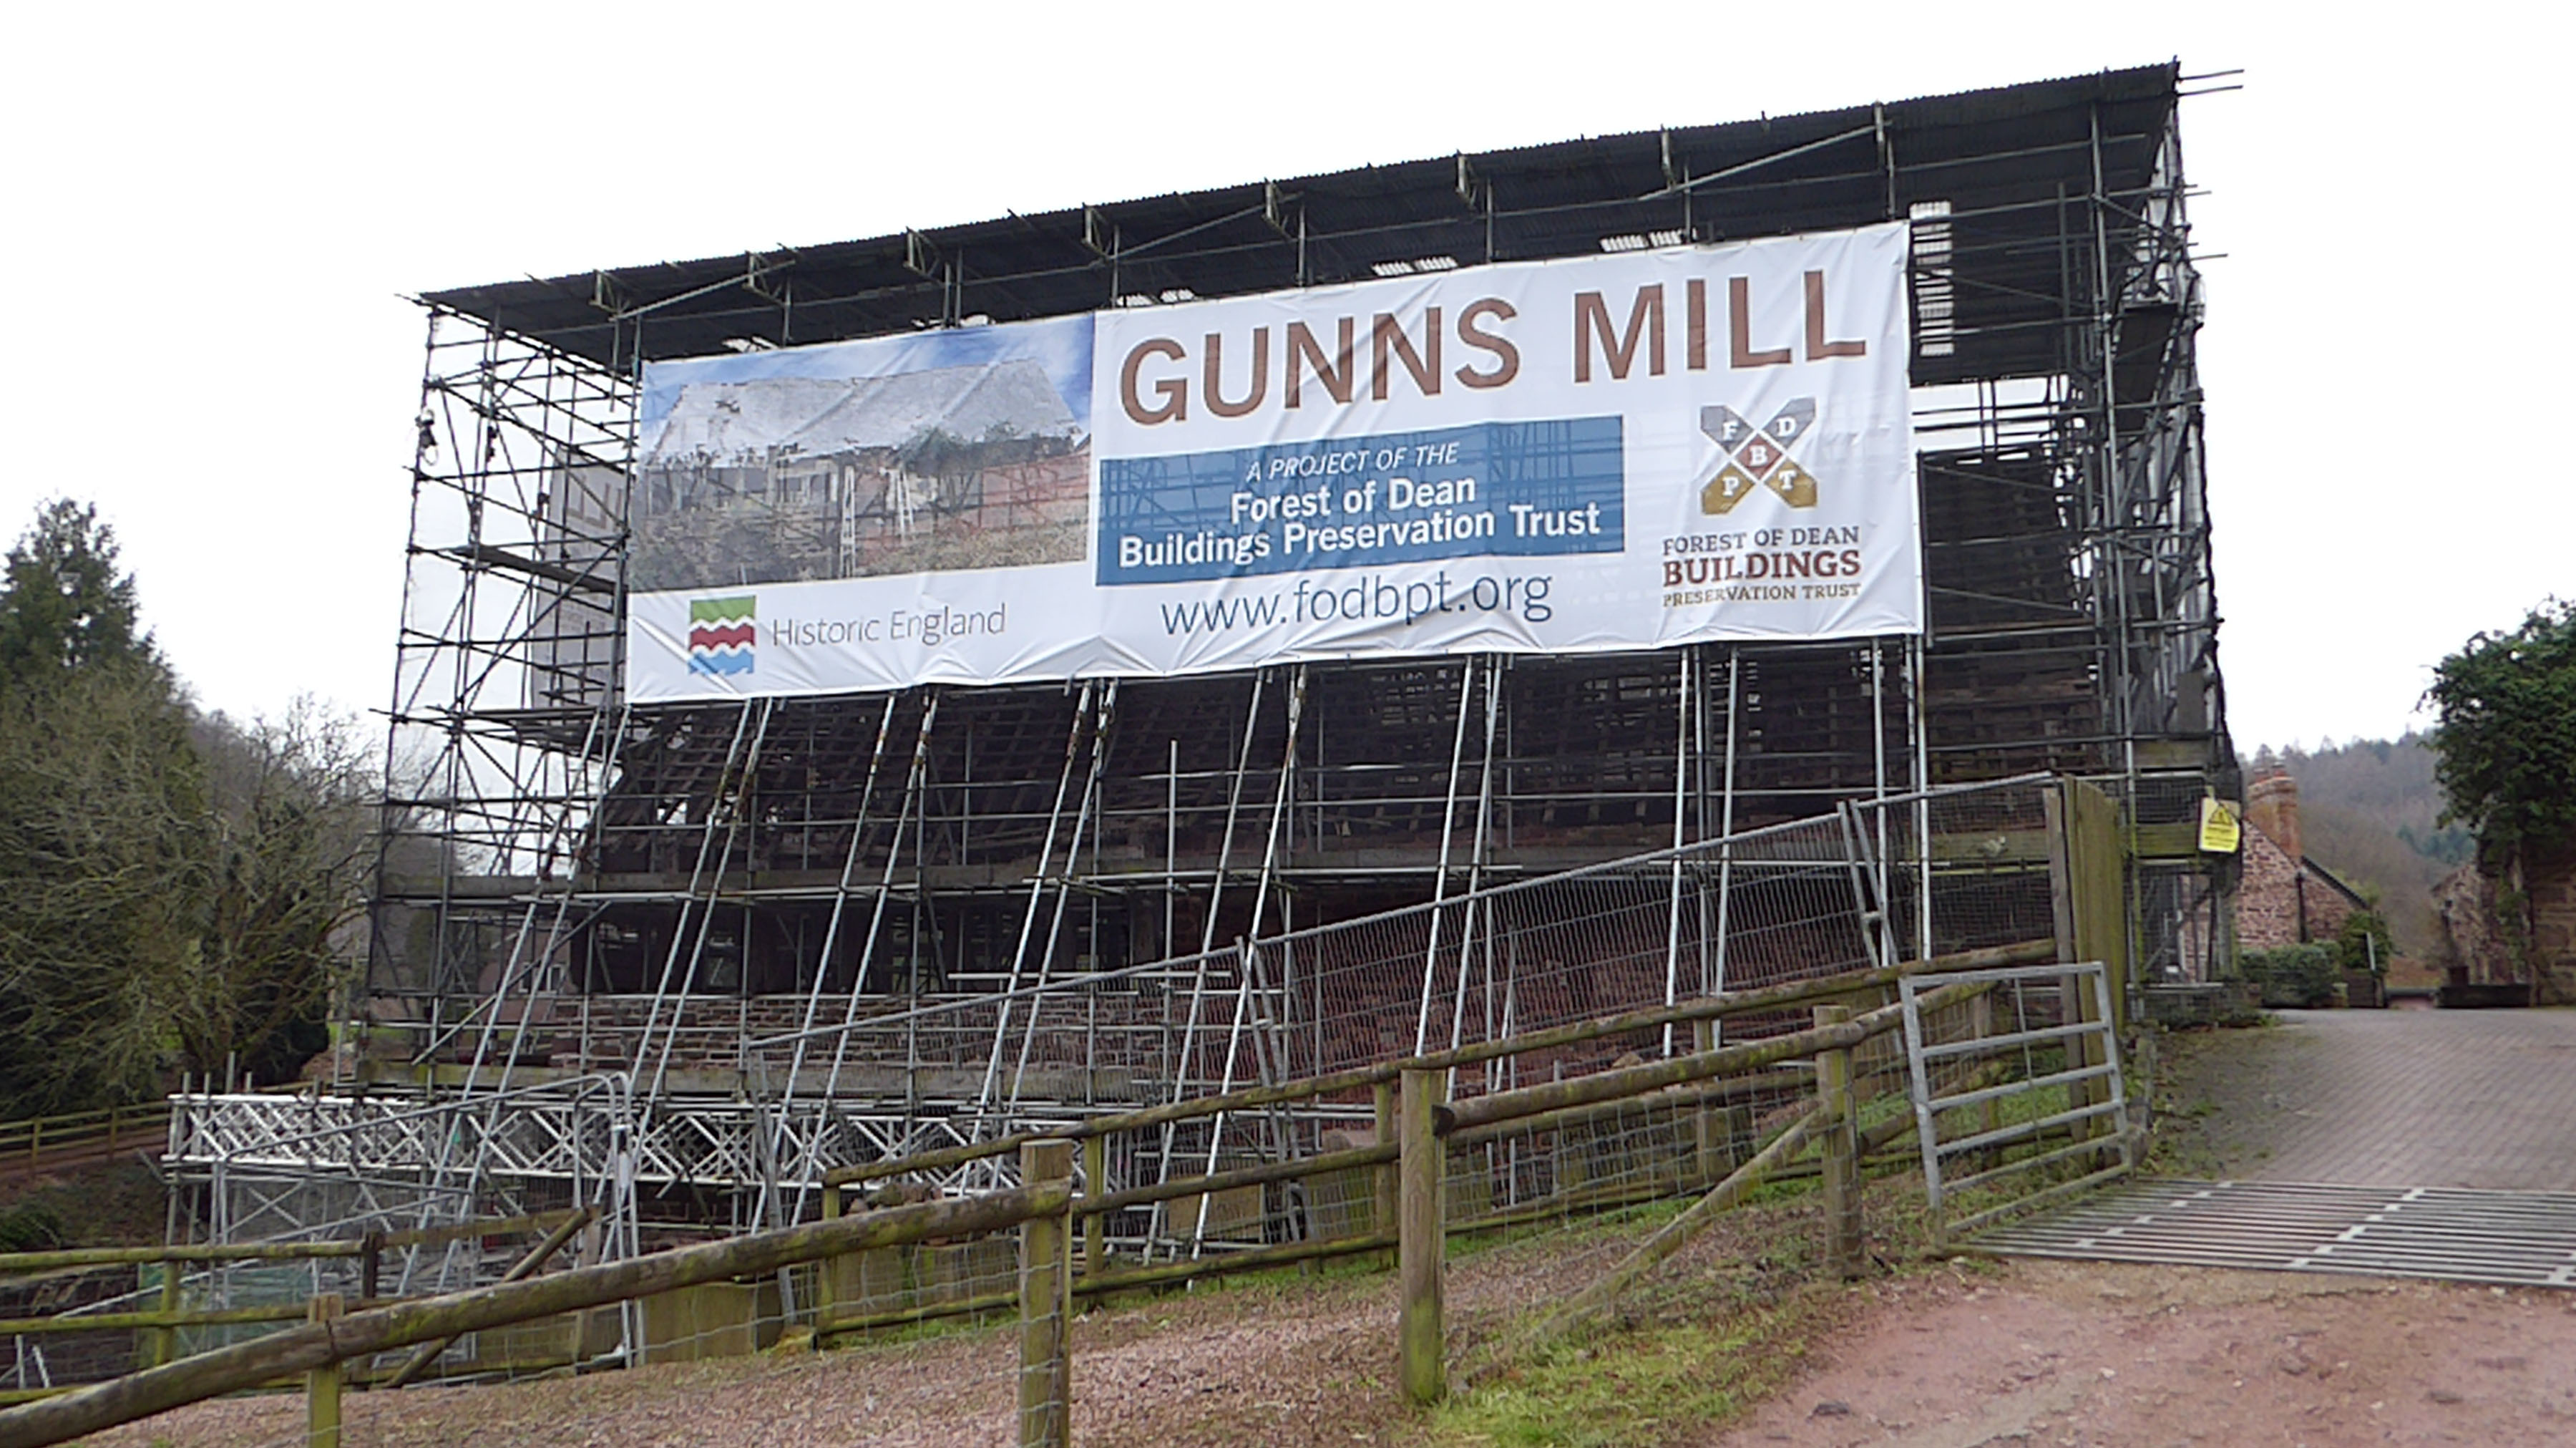 A photograph of a historic mill building entirely protected with scaffolding, showing a banner with the words 'Gunns Mill'.